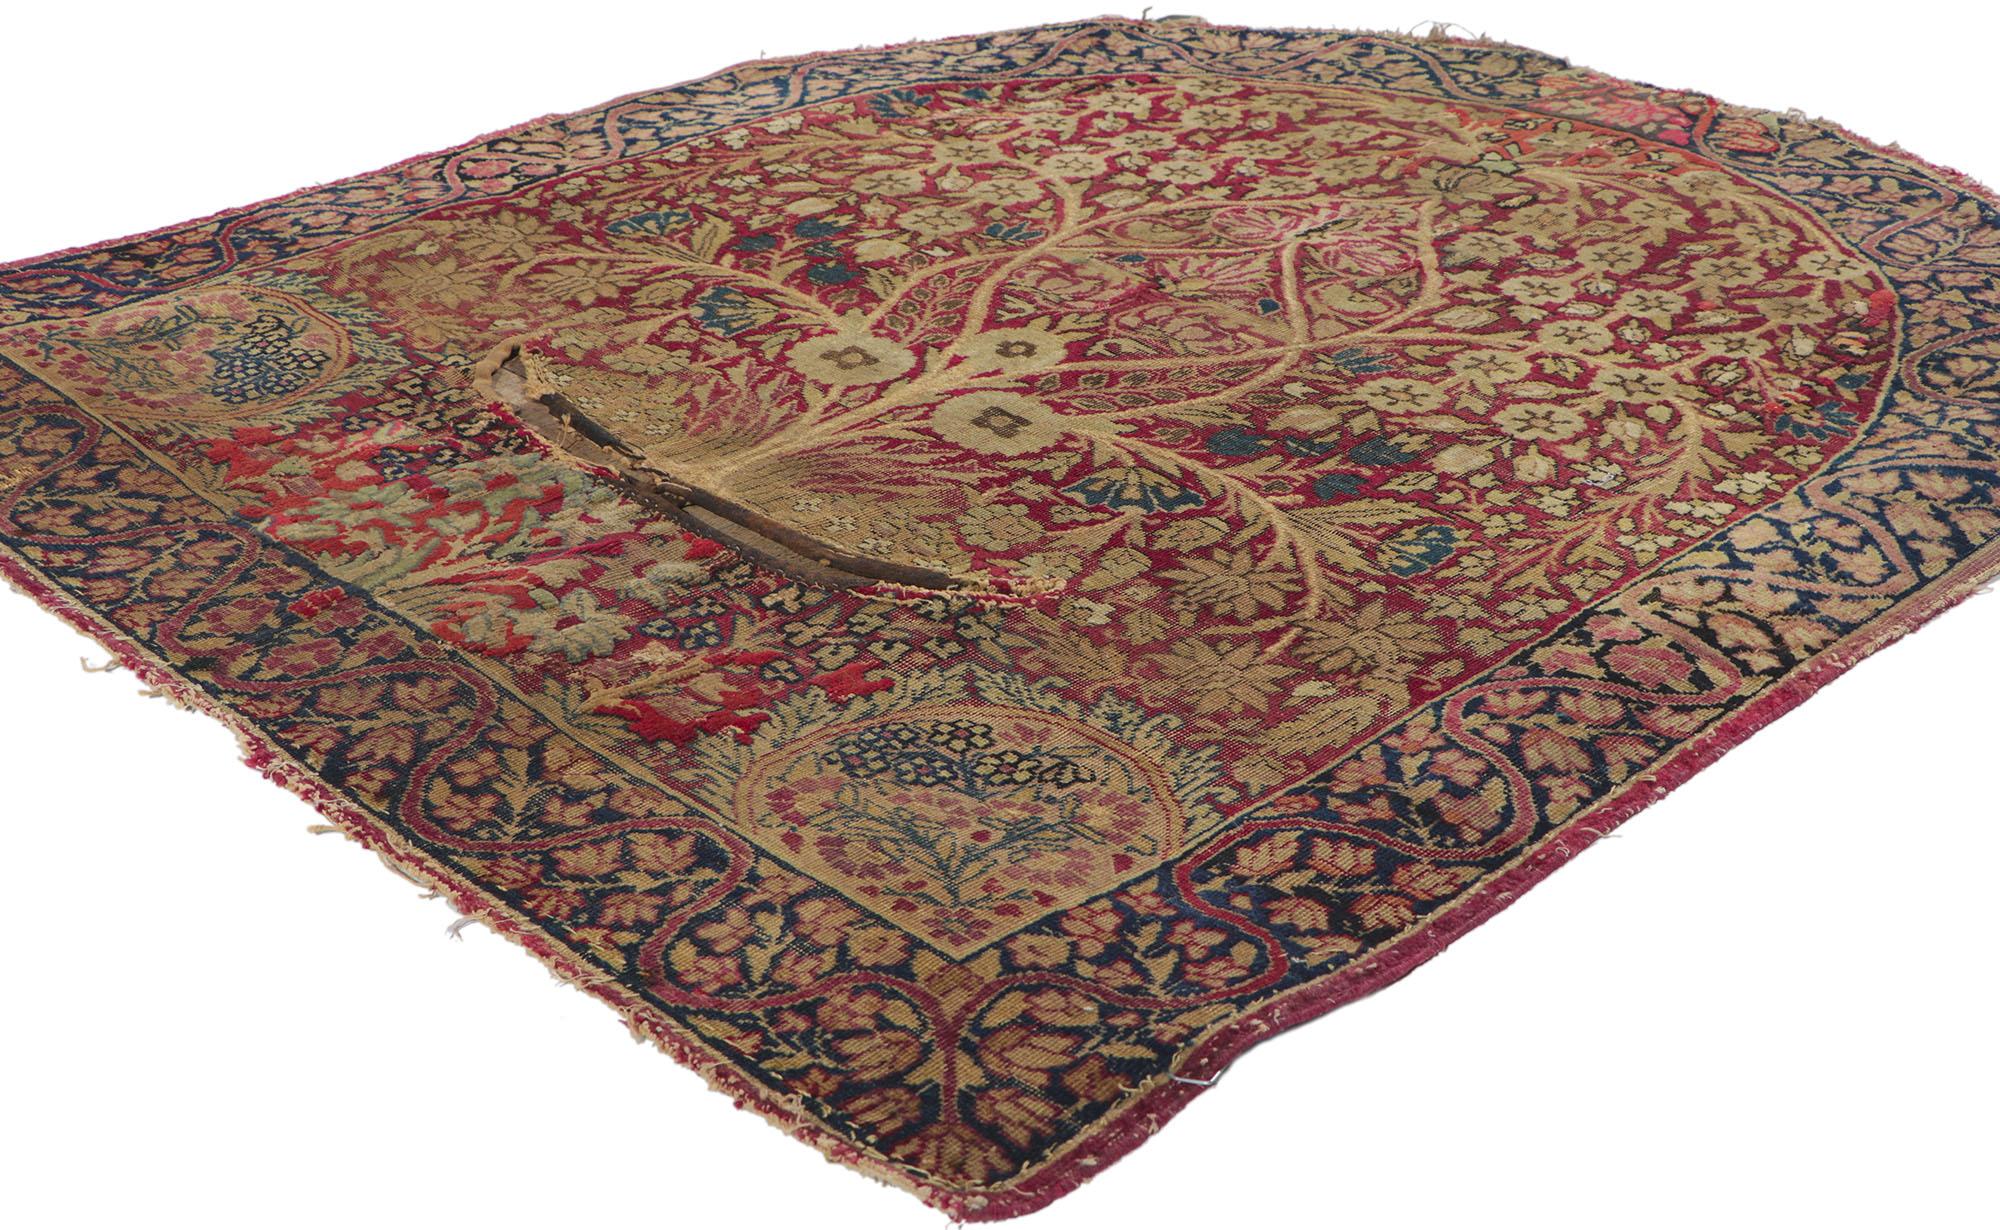 74897 Antique Persian Kerman Rug Saddle Cover, 03'03  X 03'08. Behold this hand-knotted antique Persian Kerman saddle cover, meticulously crafted with a round top and a gracefully curved slit tailored for the back of the saddle. Against a deep